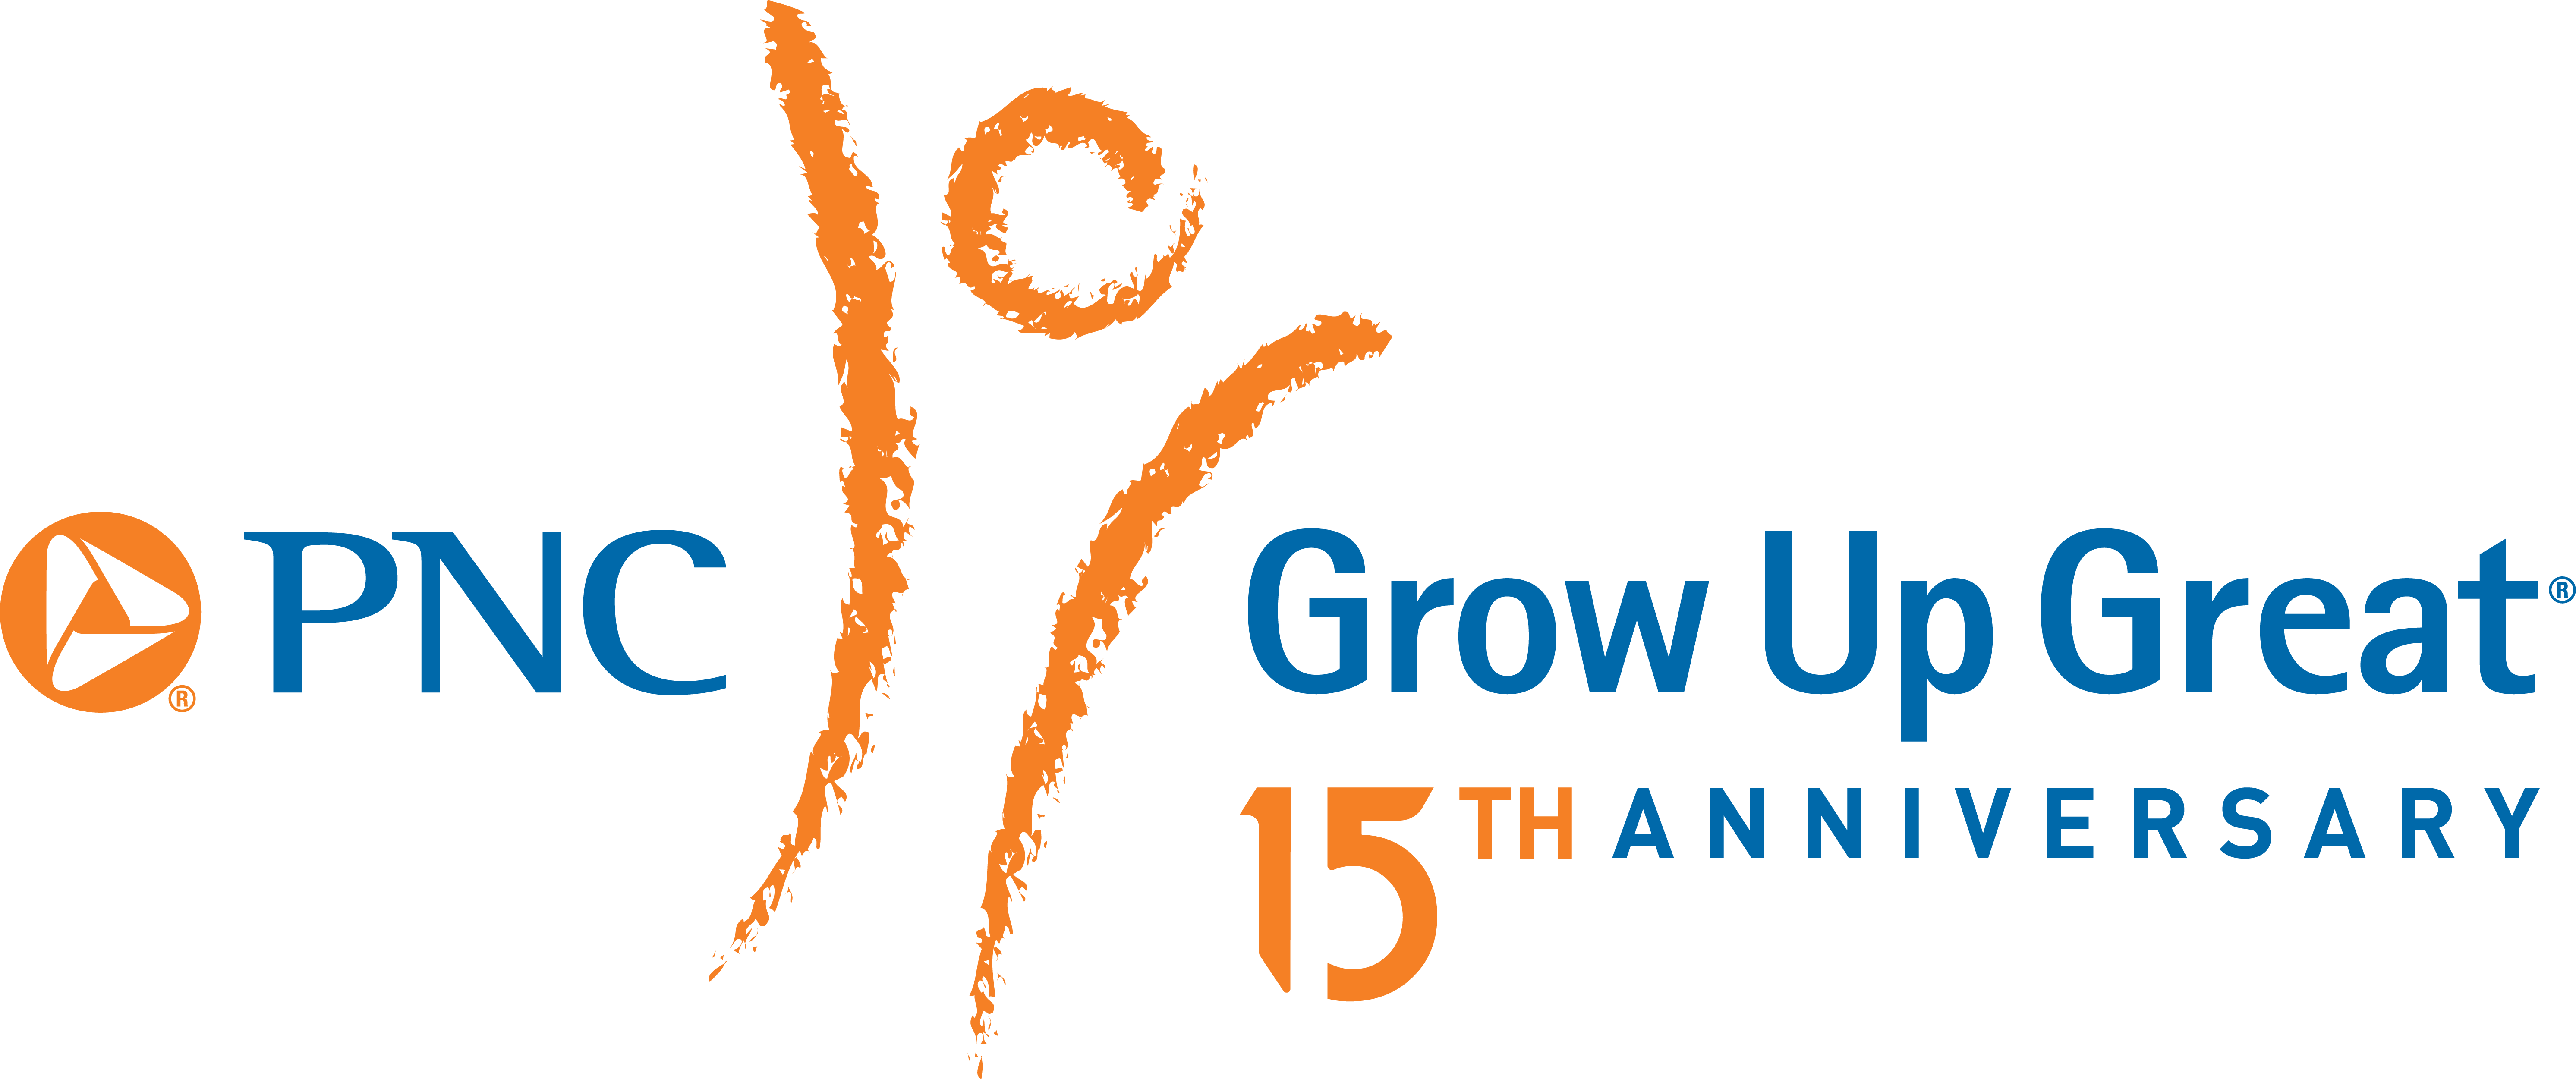 PNC Grow Up Great 15th Anniversary